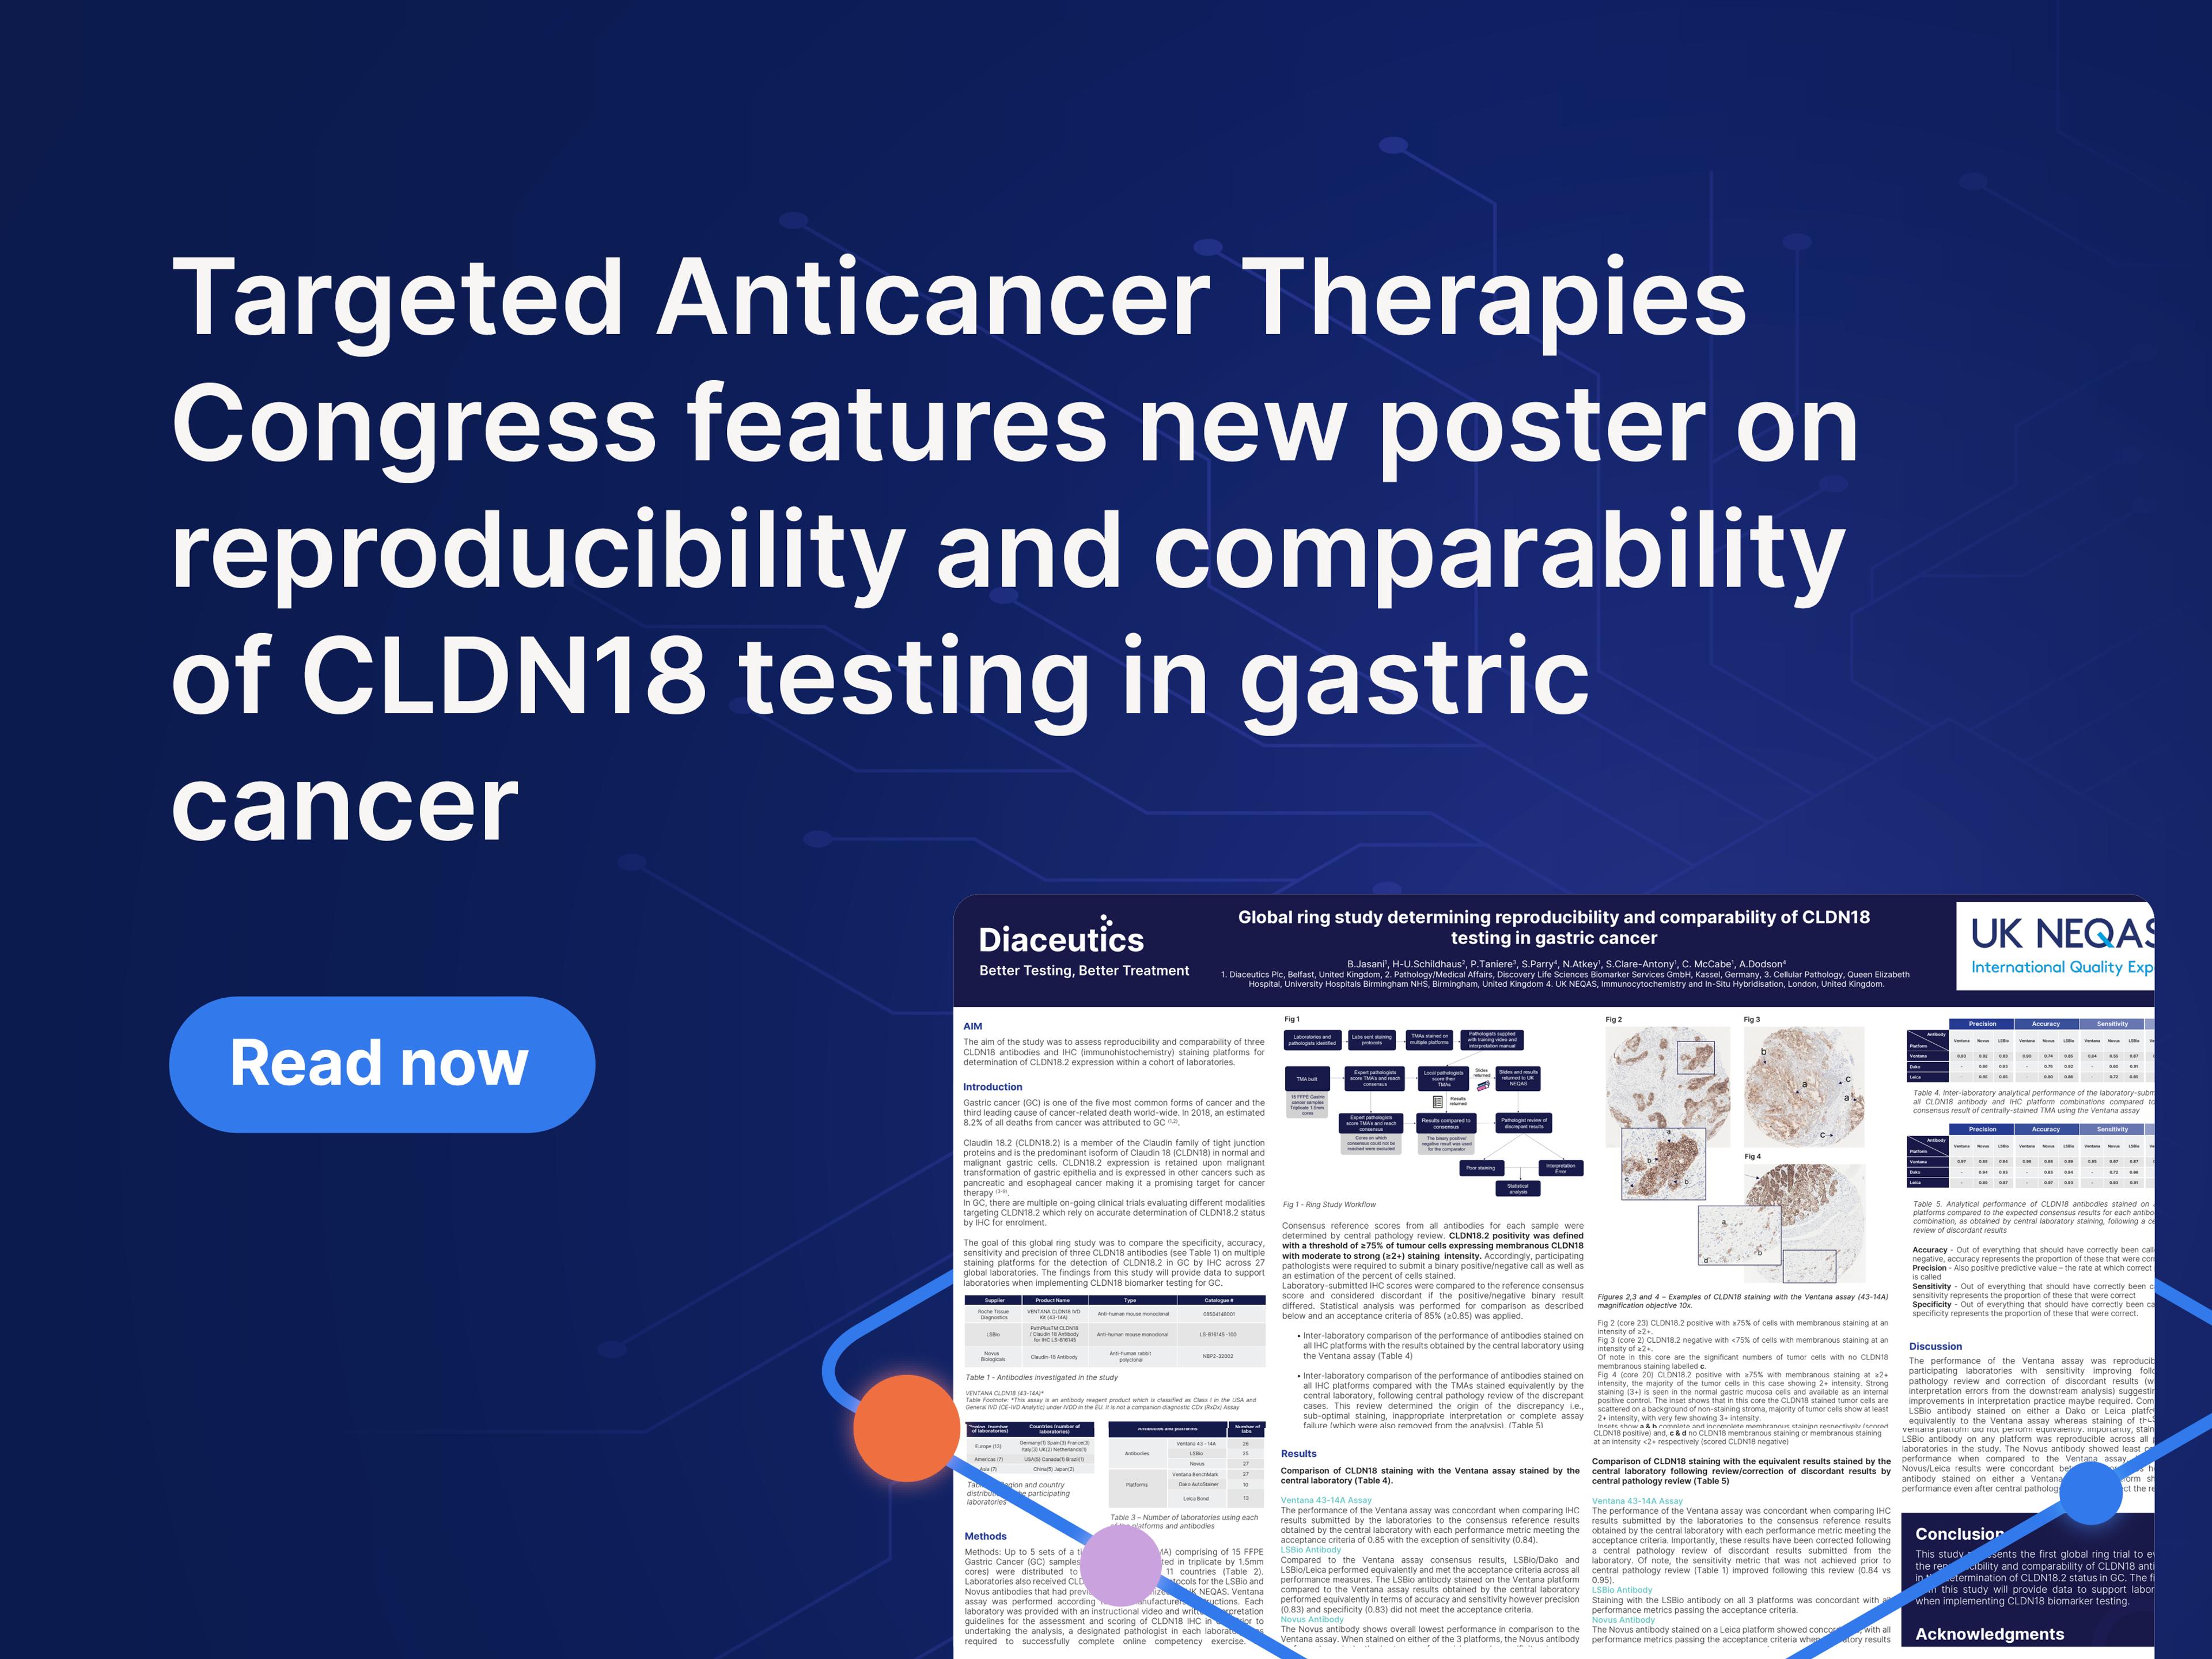 ESMO-Targeted Anticancer Therapies Congress features new poster on reproducibility and comparability of CLDN18 testing in gastric cancer